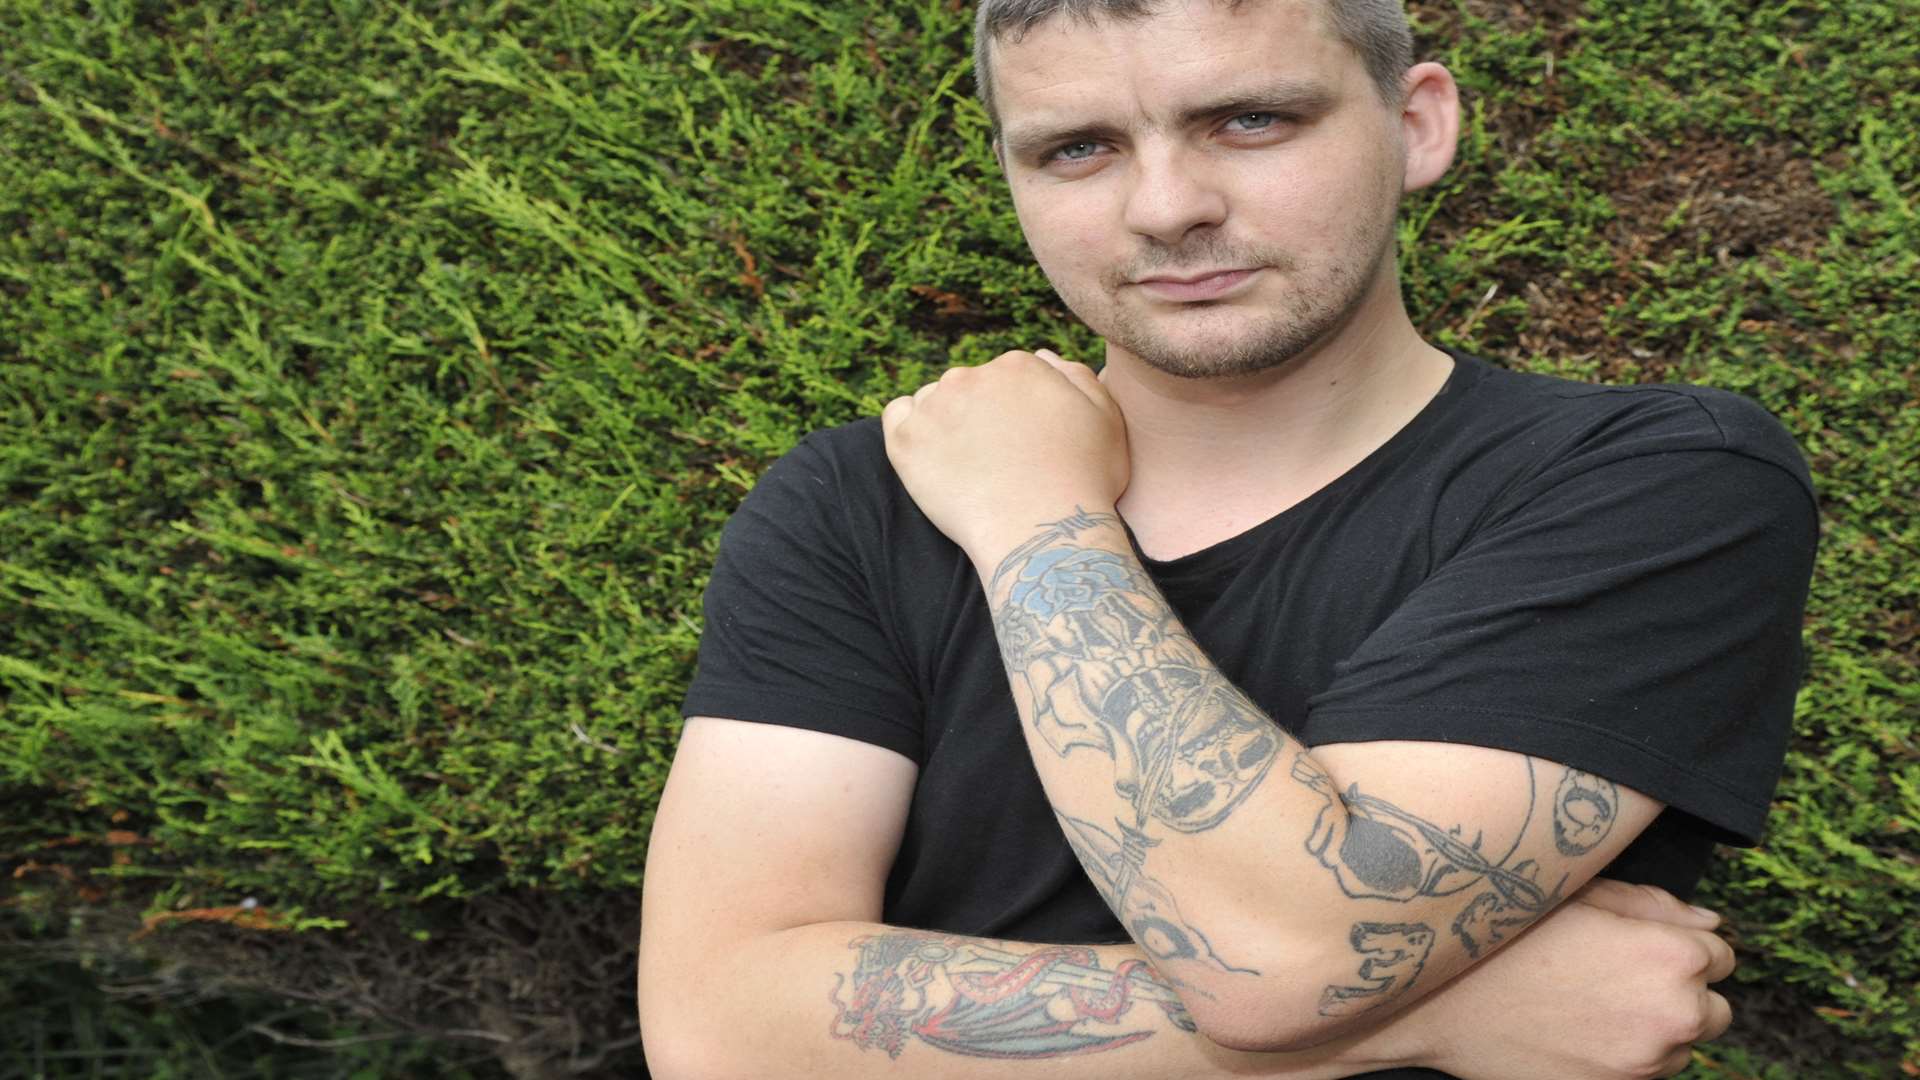 Matthew Burns was turned down as a special constable due to the tattoos on his arm